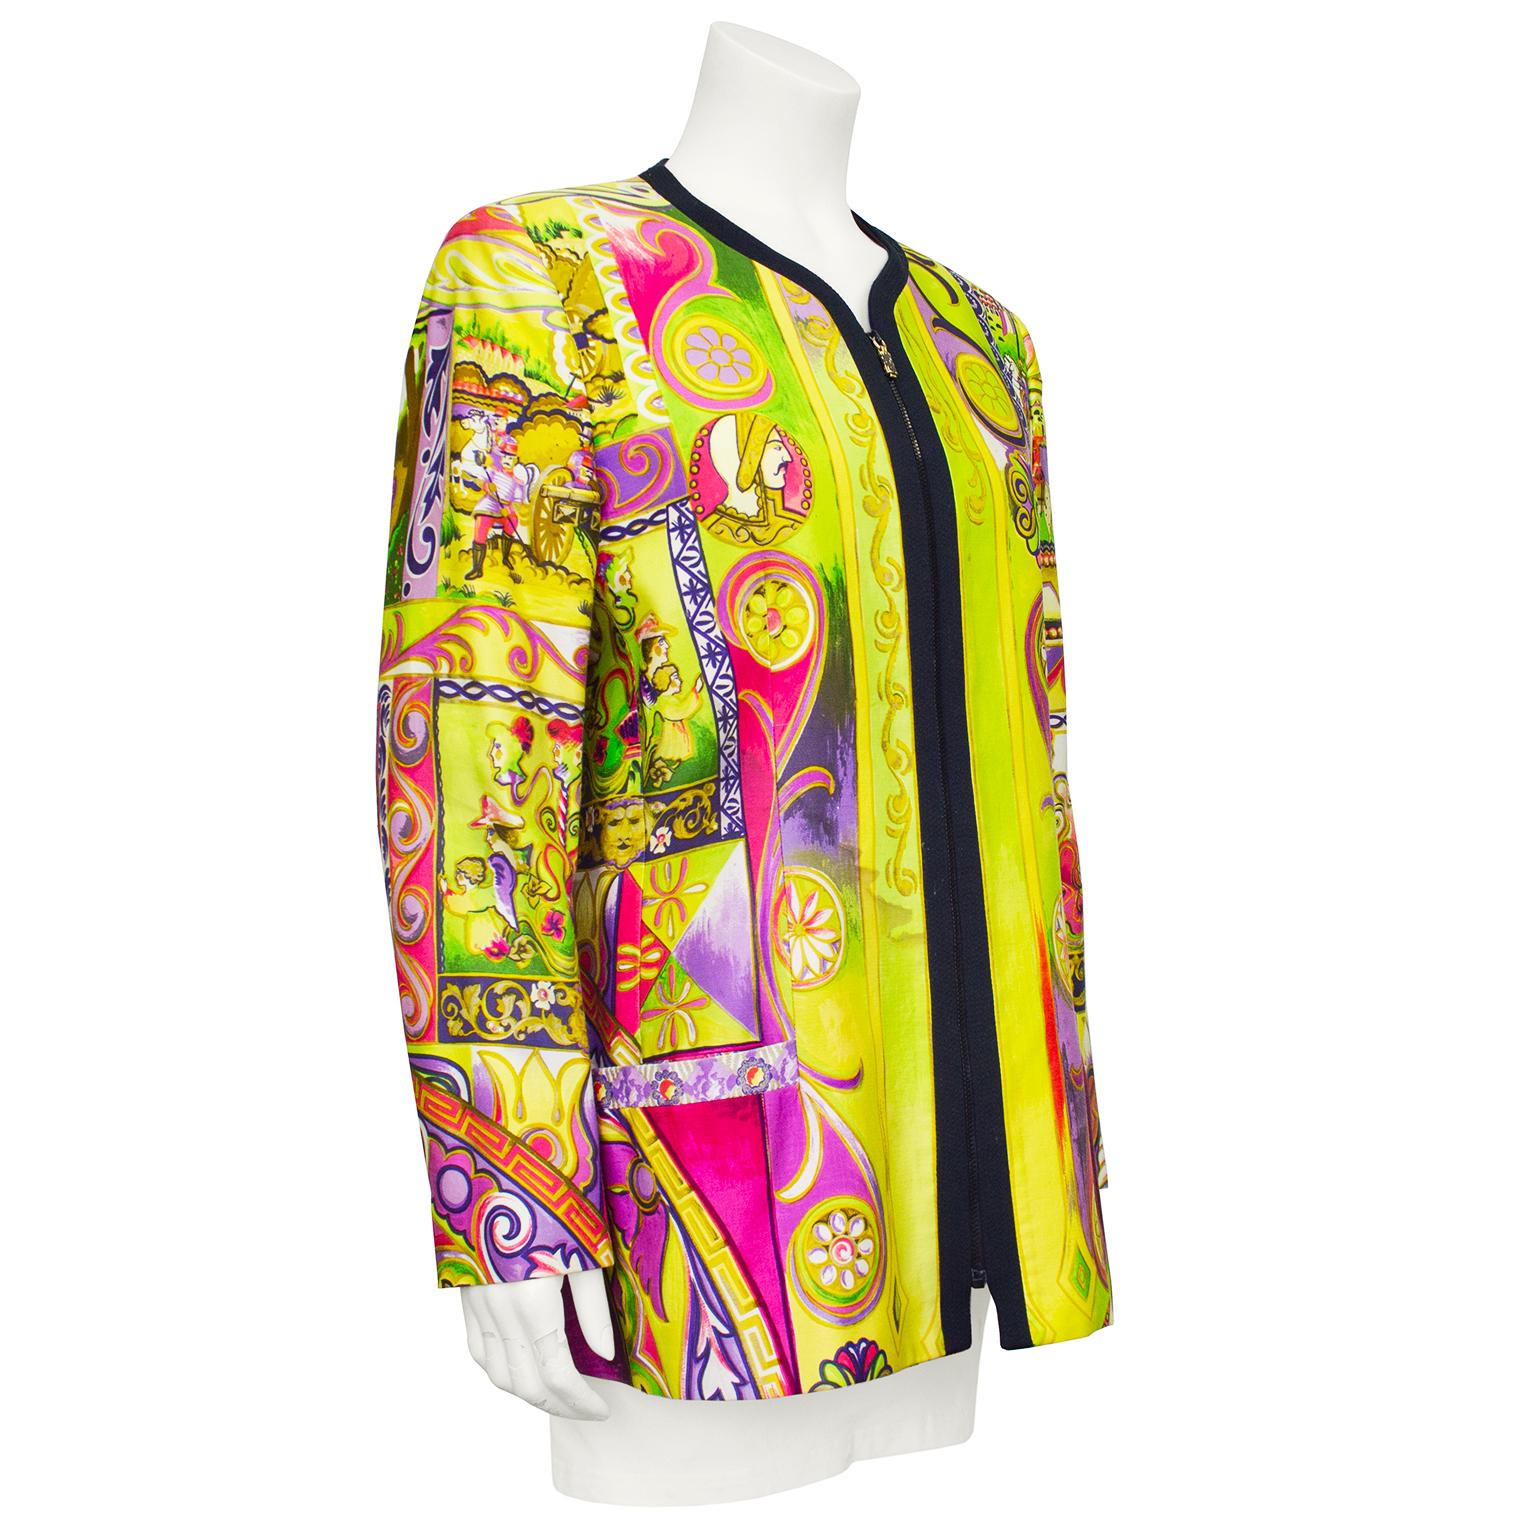 Early 1990s Gianni Versace Couture black label cotton jacket. Shades of yellows, greens, pinks and purples in an all over baroque print. Collarless with black trim with black top stitching and black zipper up centre front. Lime green lining &